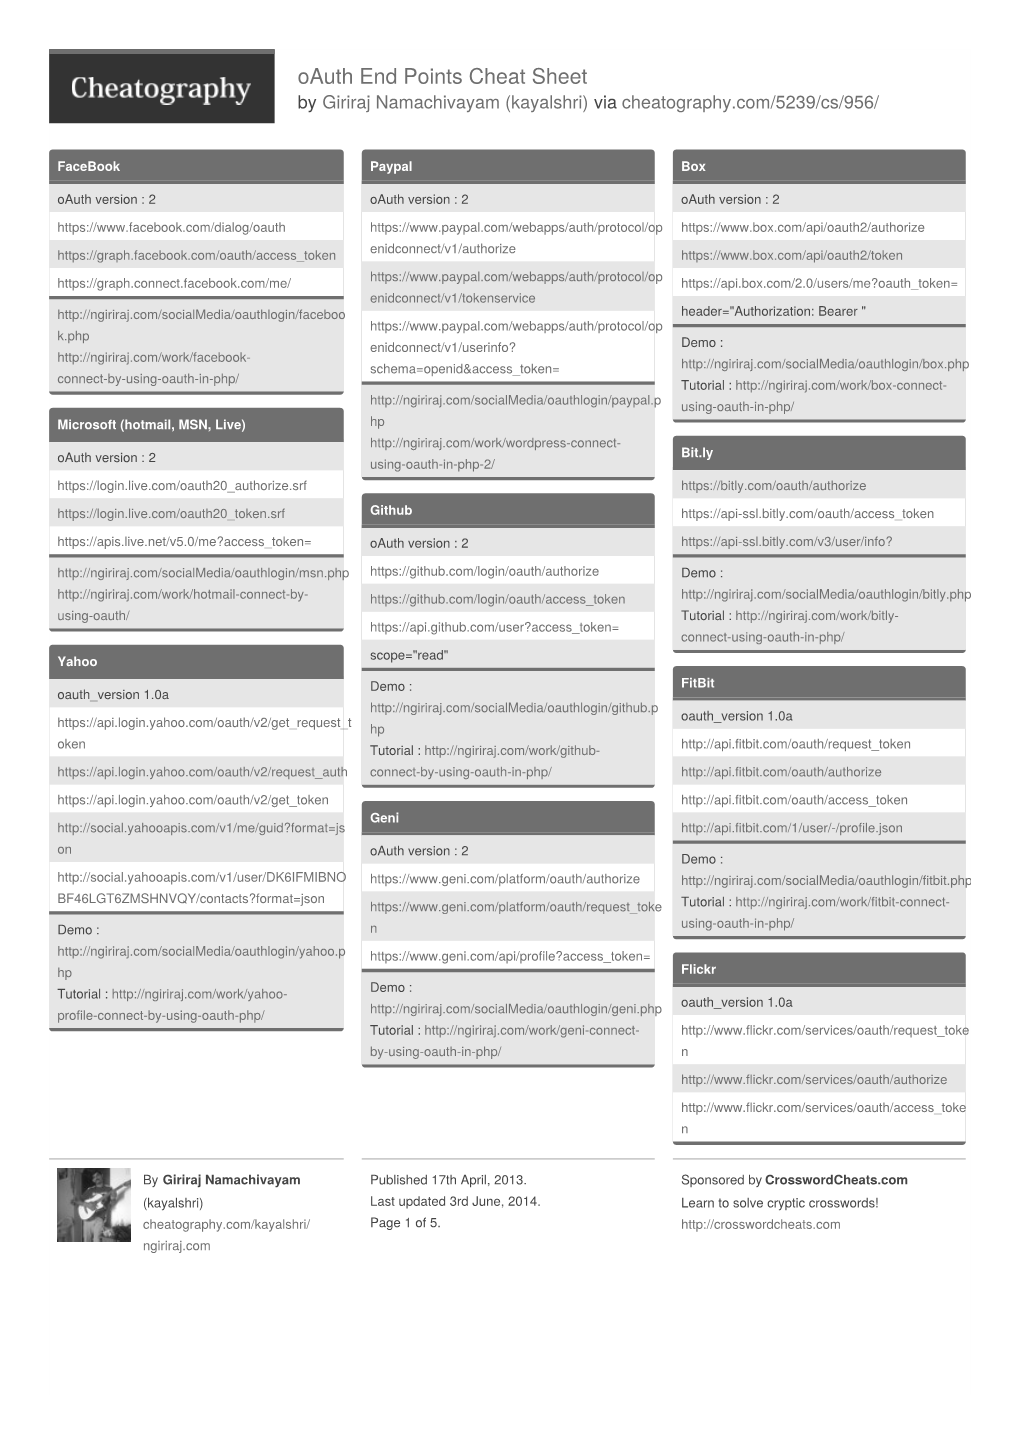 Oauth End Points Cheat Sheet by Kayalshri